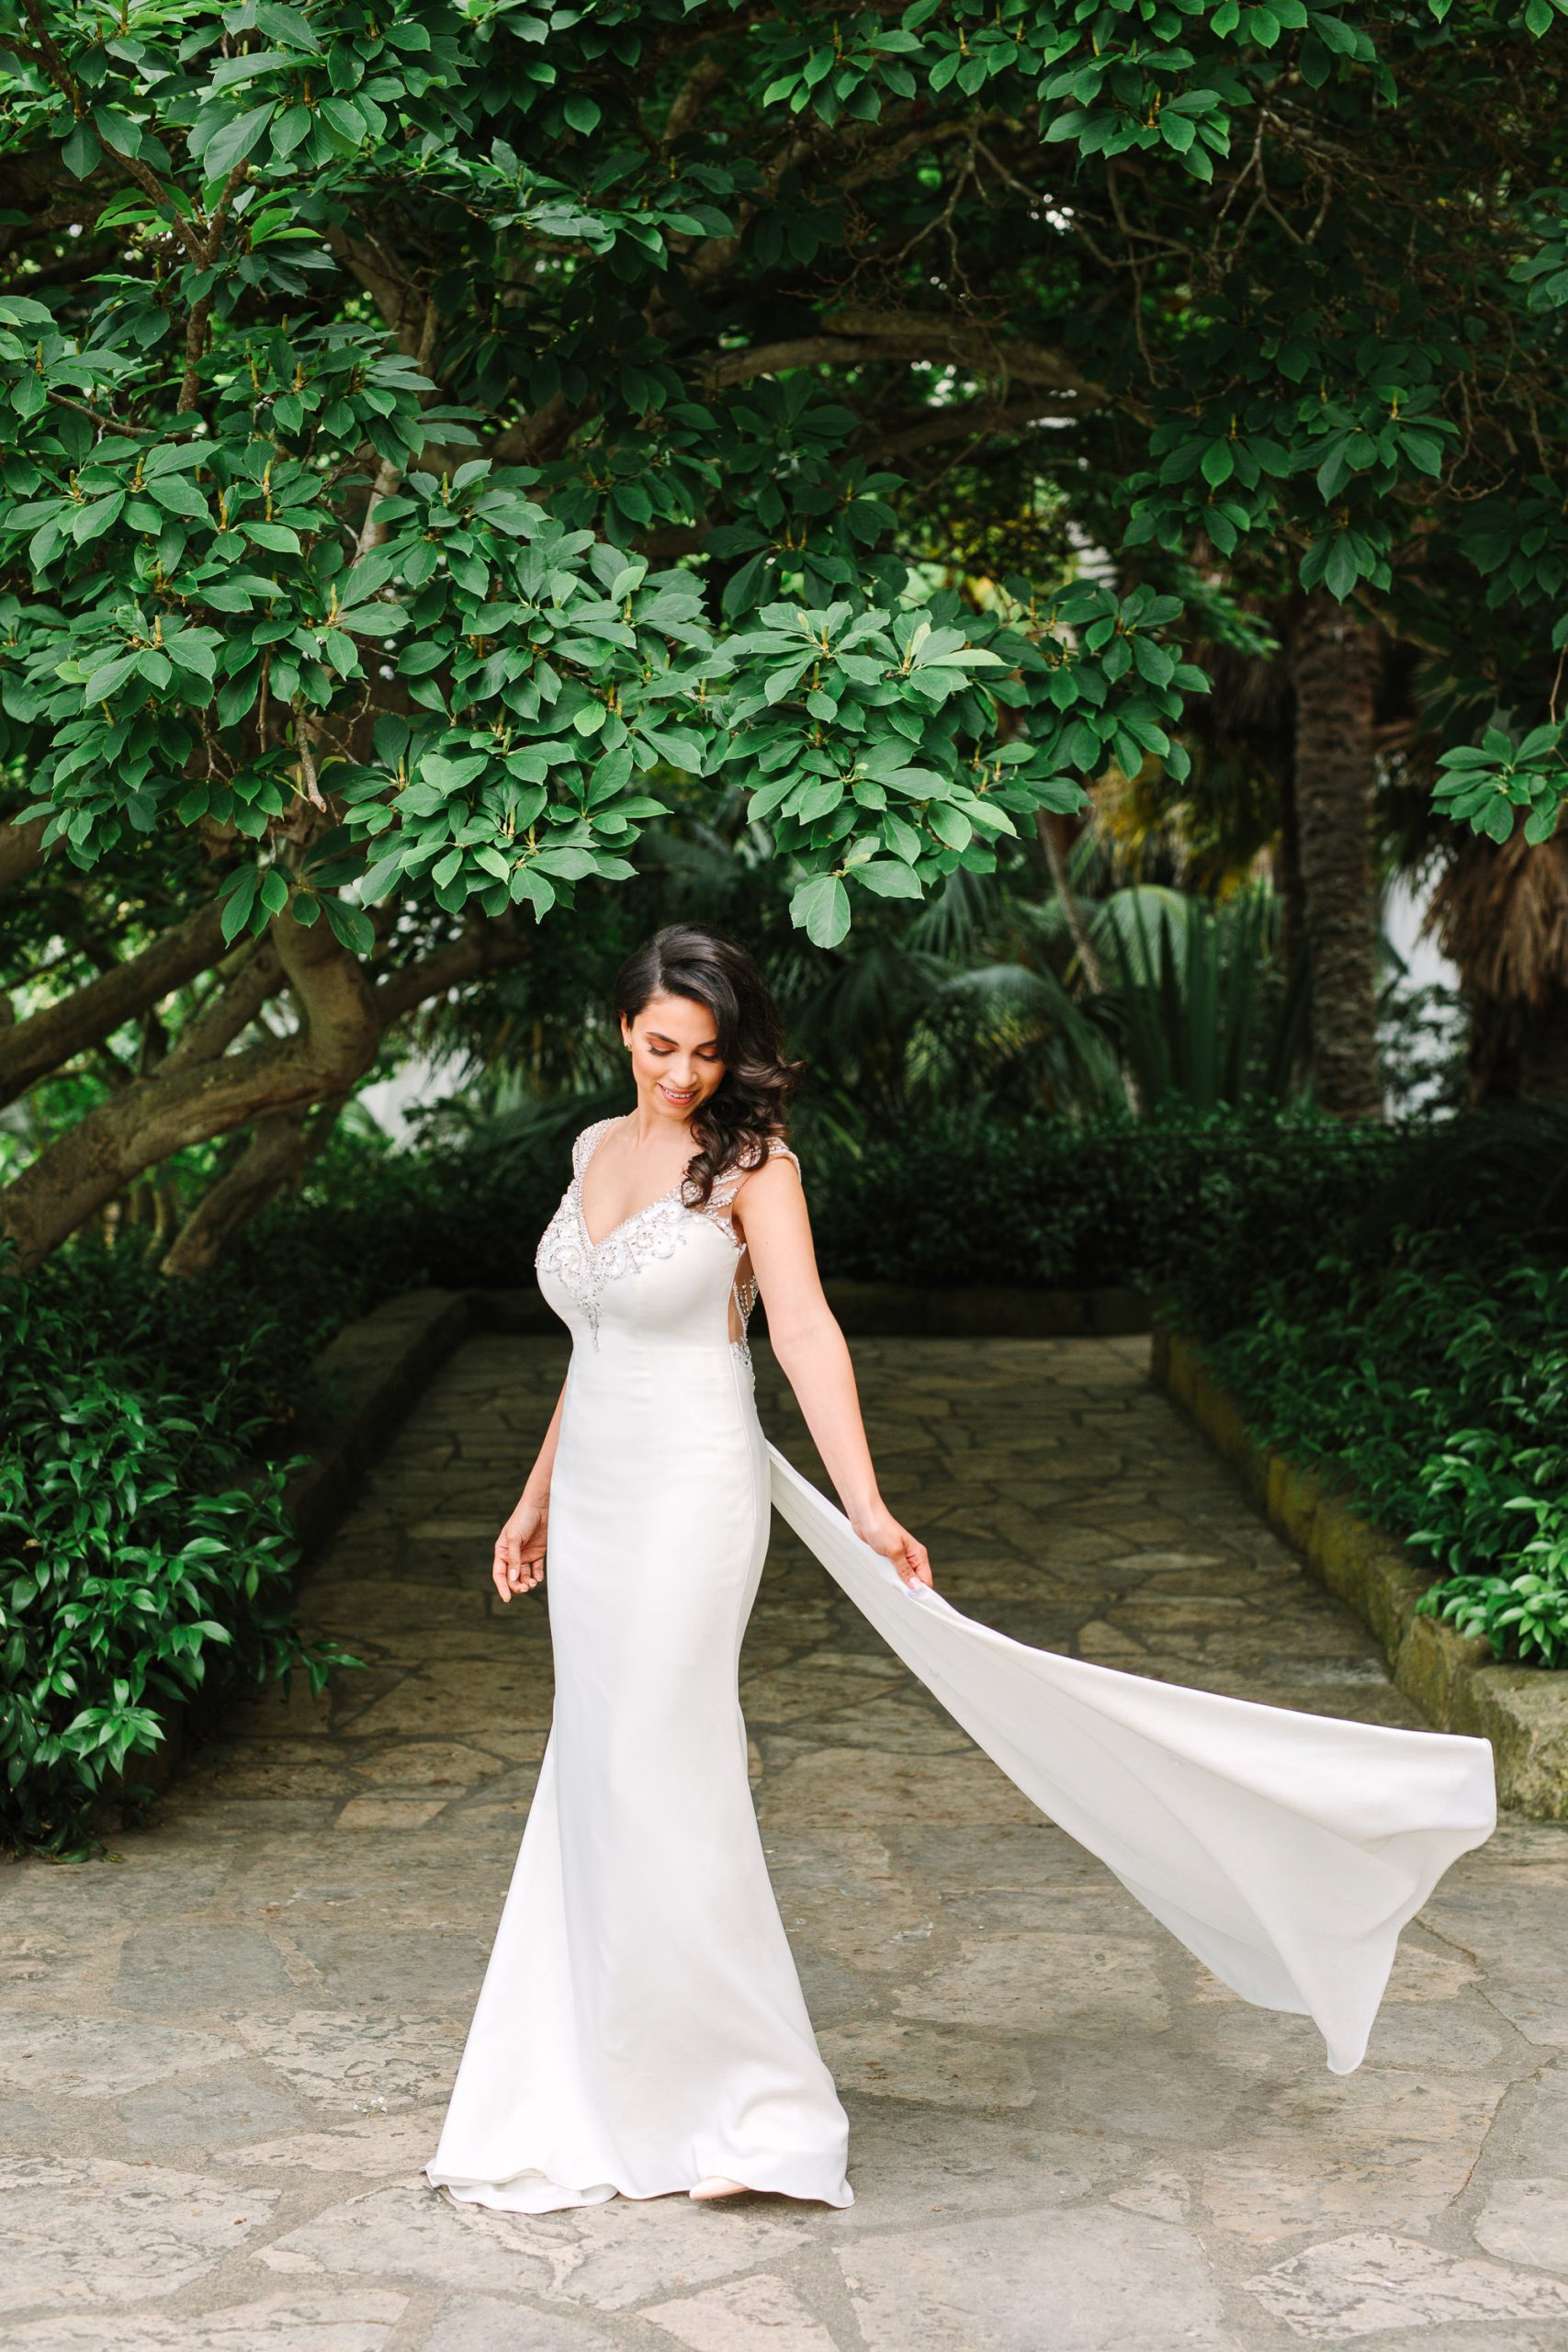 Bride twirling at Santa Barbara Courthouse by Mary Costa Photography